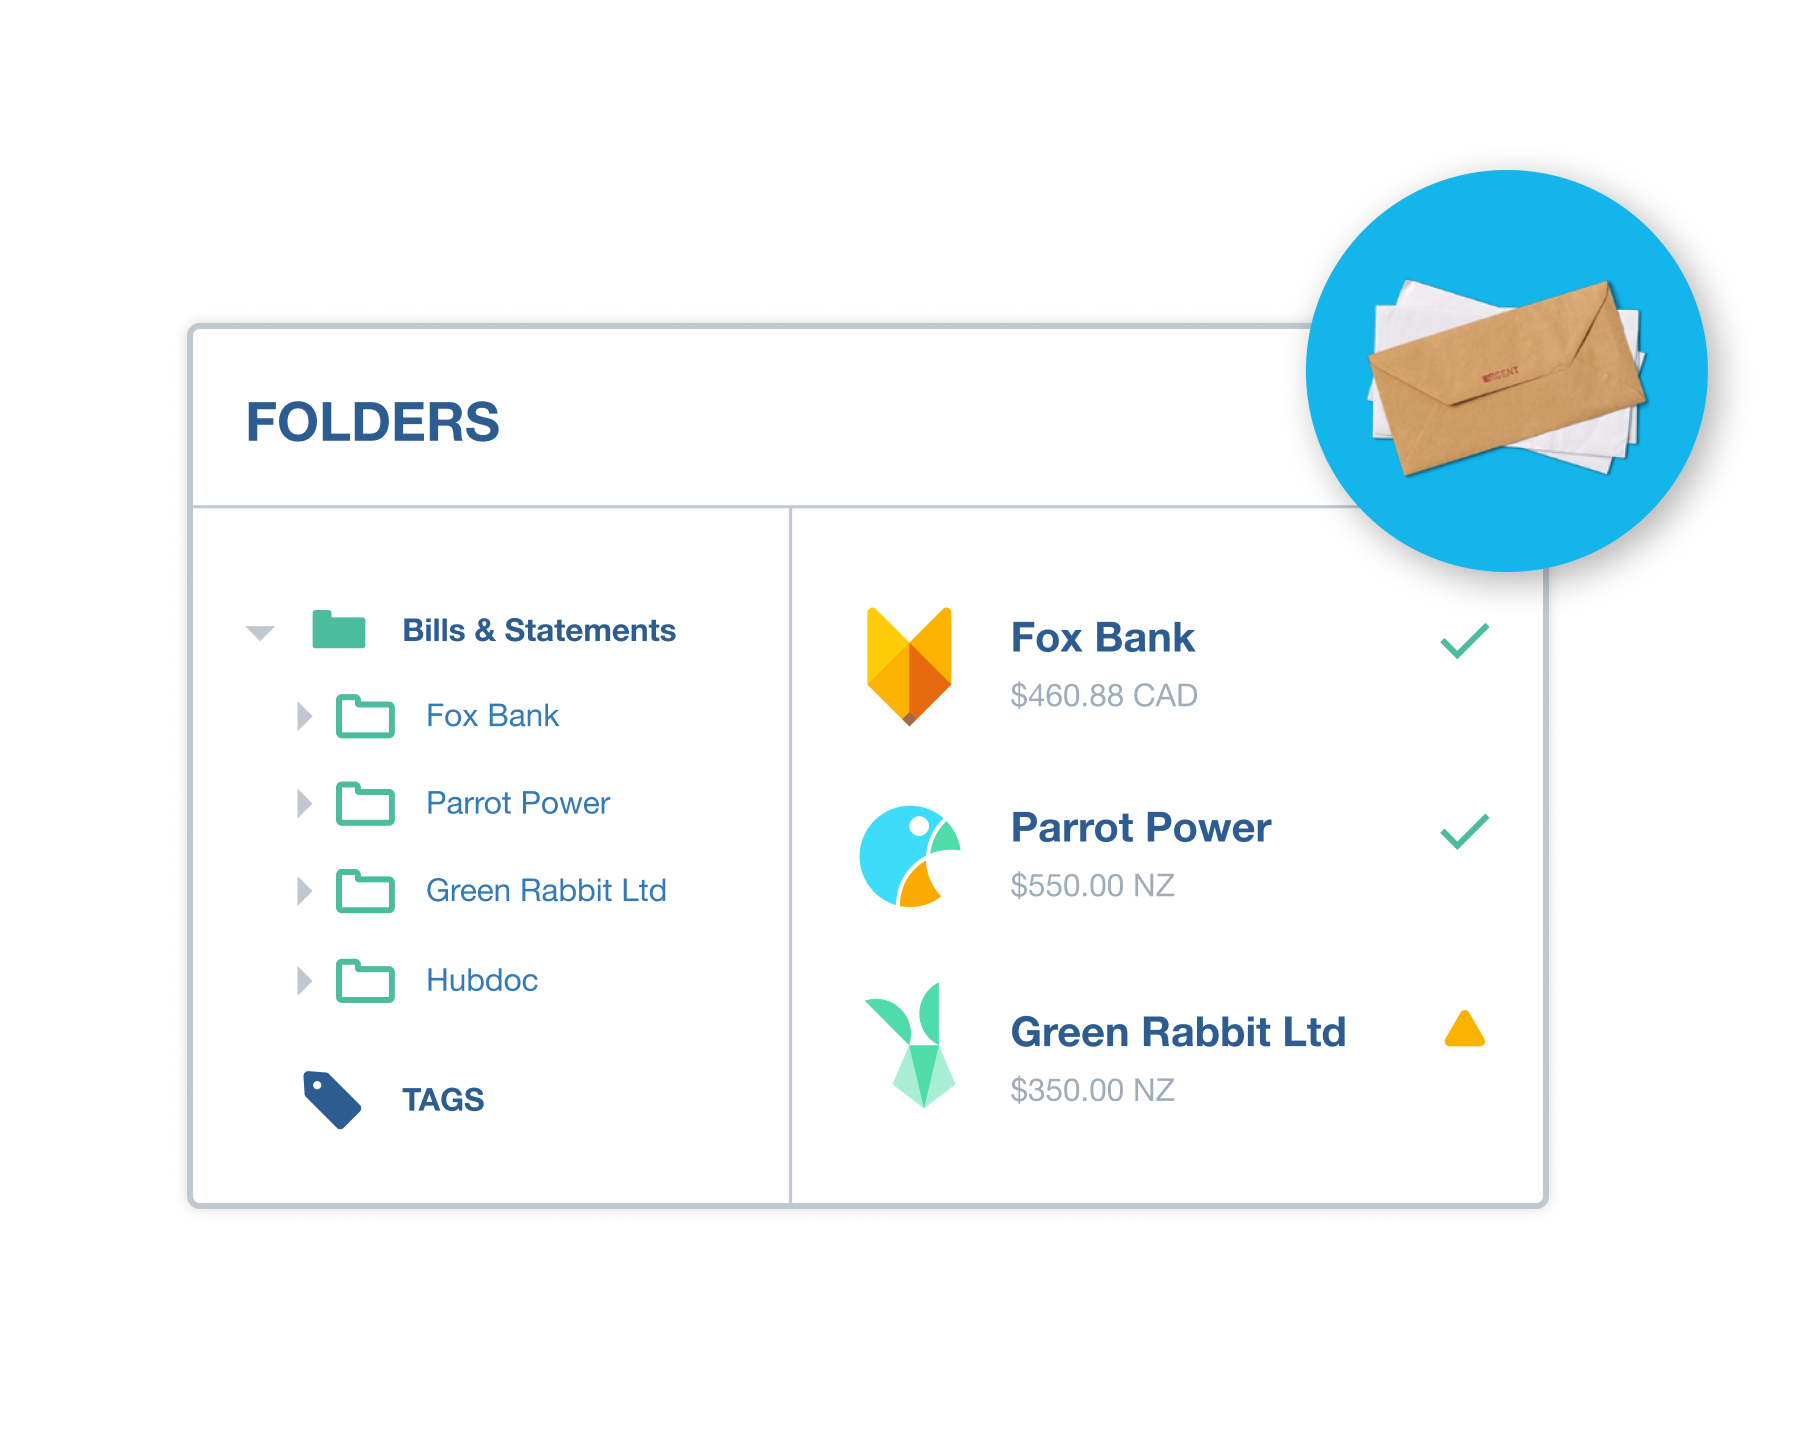 Folders in Hubdoc show how to organize data capture.